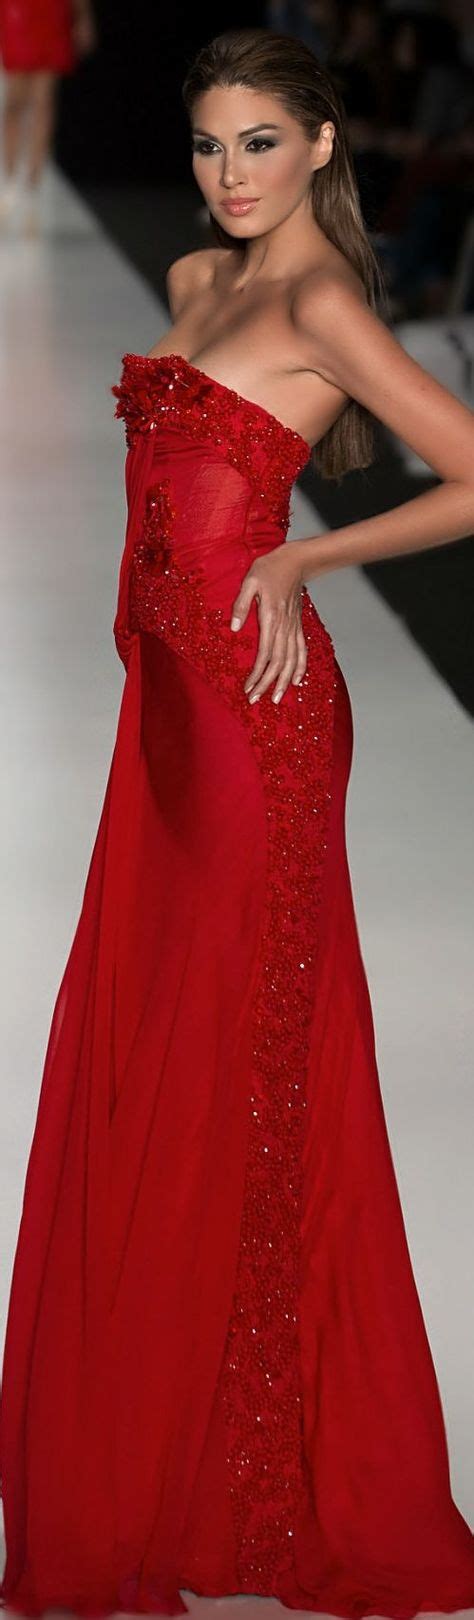 558 Best Red Images On Pinterest Red Fashion Red And Red Gowns